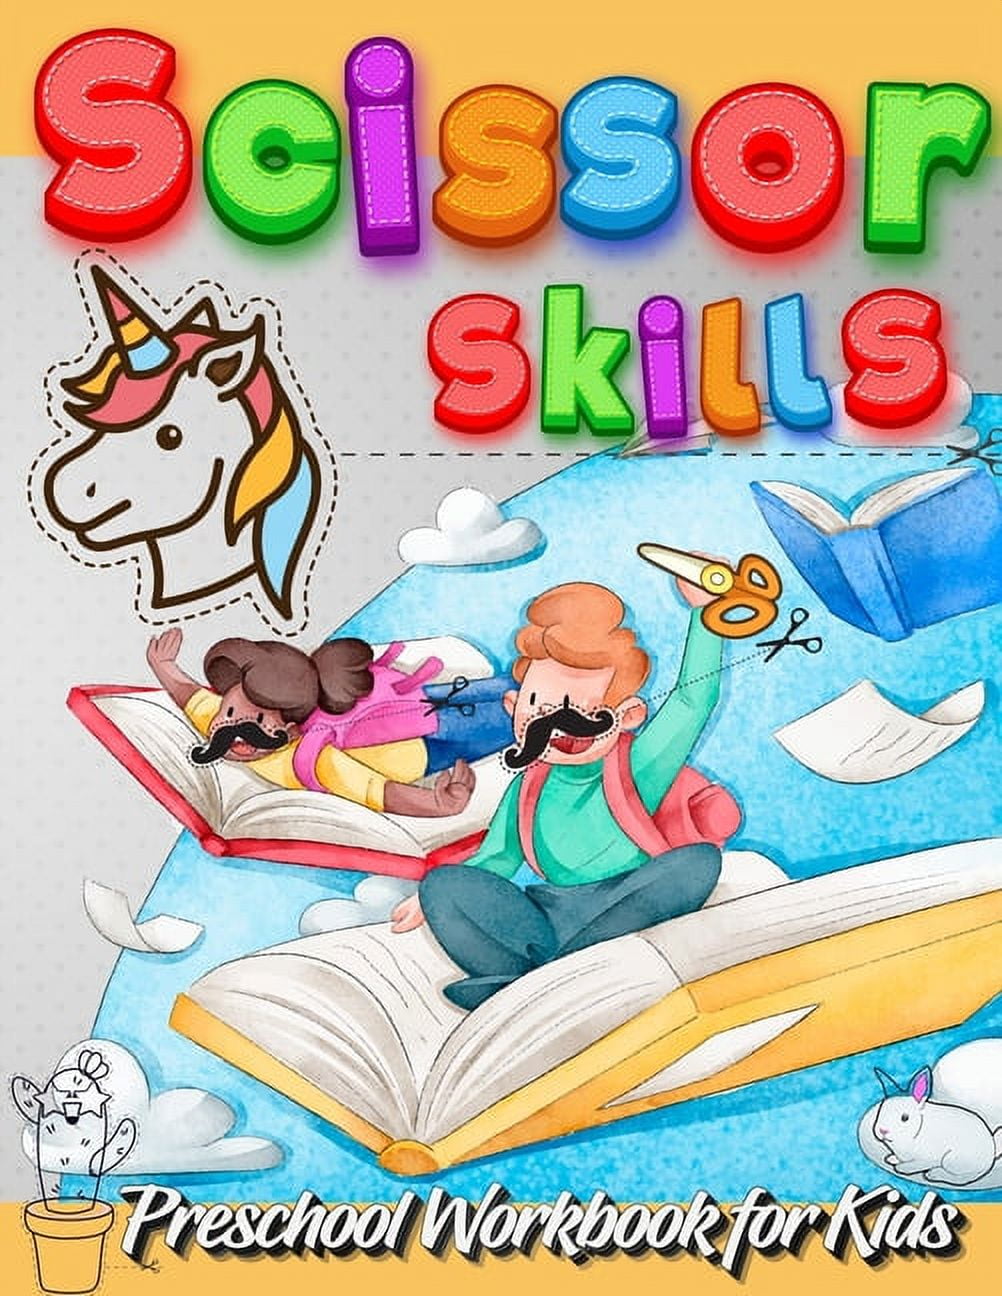 Scissors Skill Book for Children Ages 3-5: Two Books in One, One Scissors Skills Book, and One Coloring Book for Kids [Book]